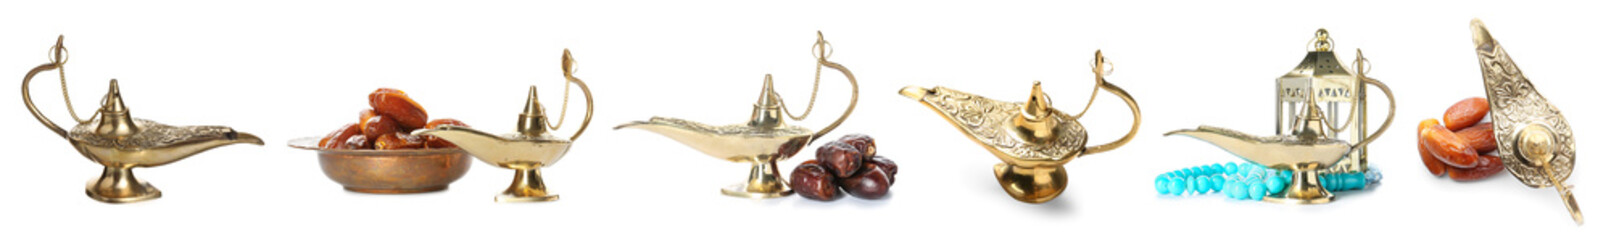 Collage of Aladdin lamp of wishes with sweet dates and tasbih on white background